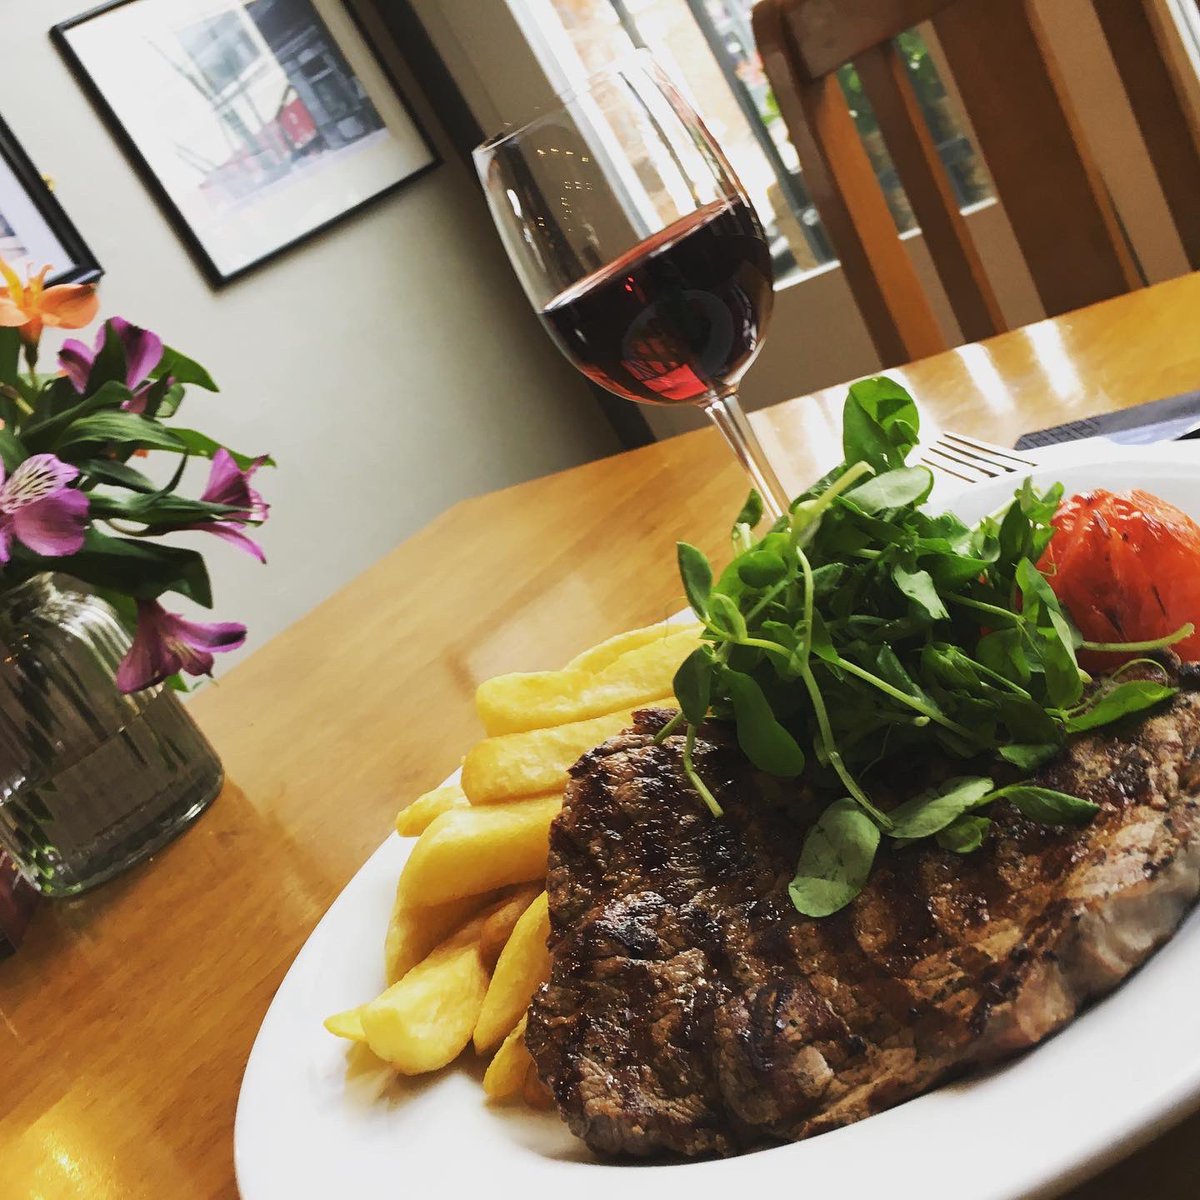 Join us from 5pm today and enjoy a succulent 28 day dry aged 10oz rump steak, choice of potatoes, grill garnish and wine for just £15.95. Walk ins are welcome but we do get busy on our steak night so it’s always advisable to pre-book by Calling 01244 328195 or booking online.